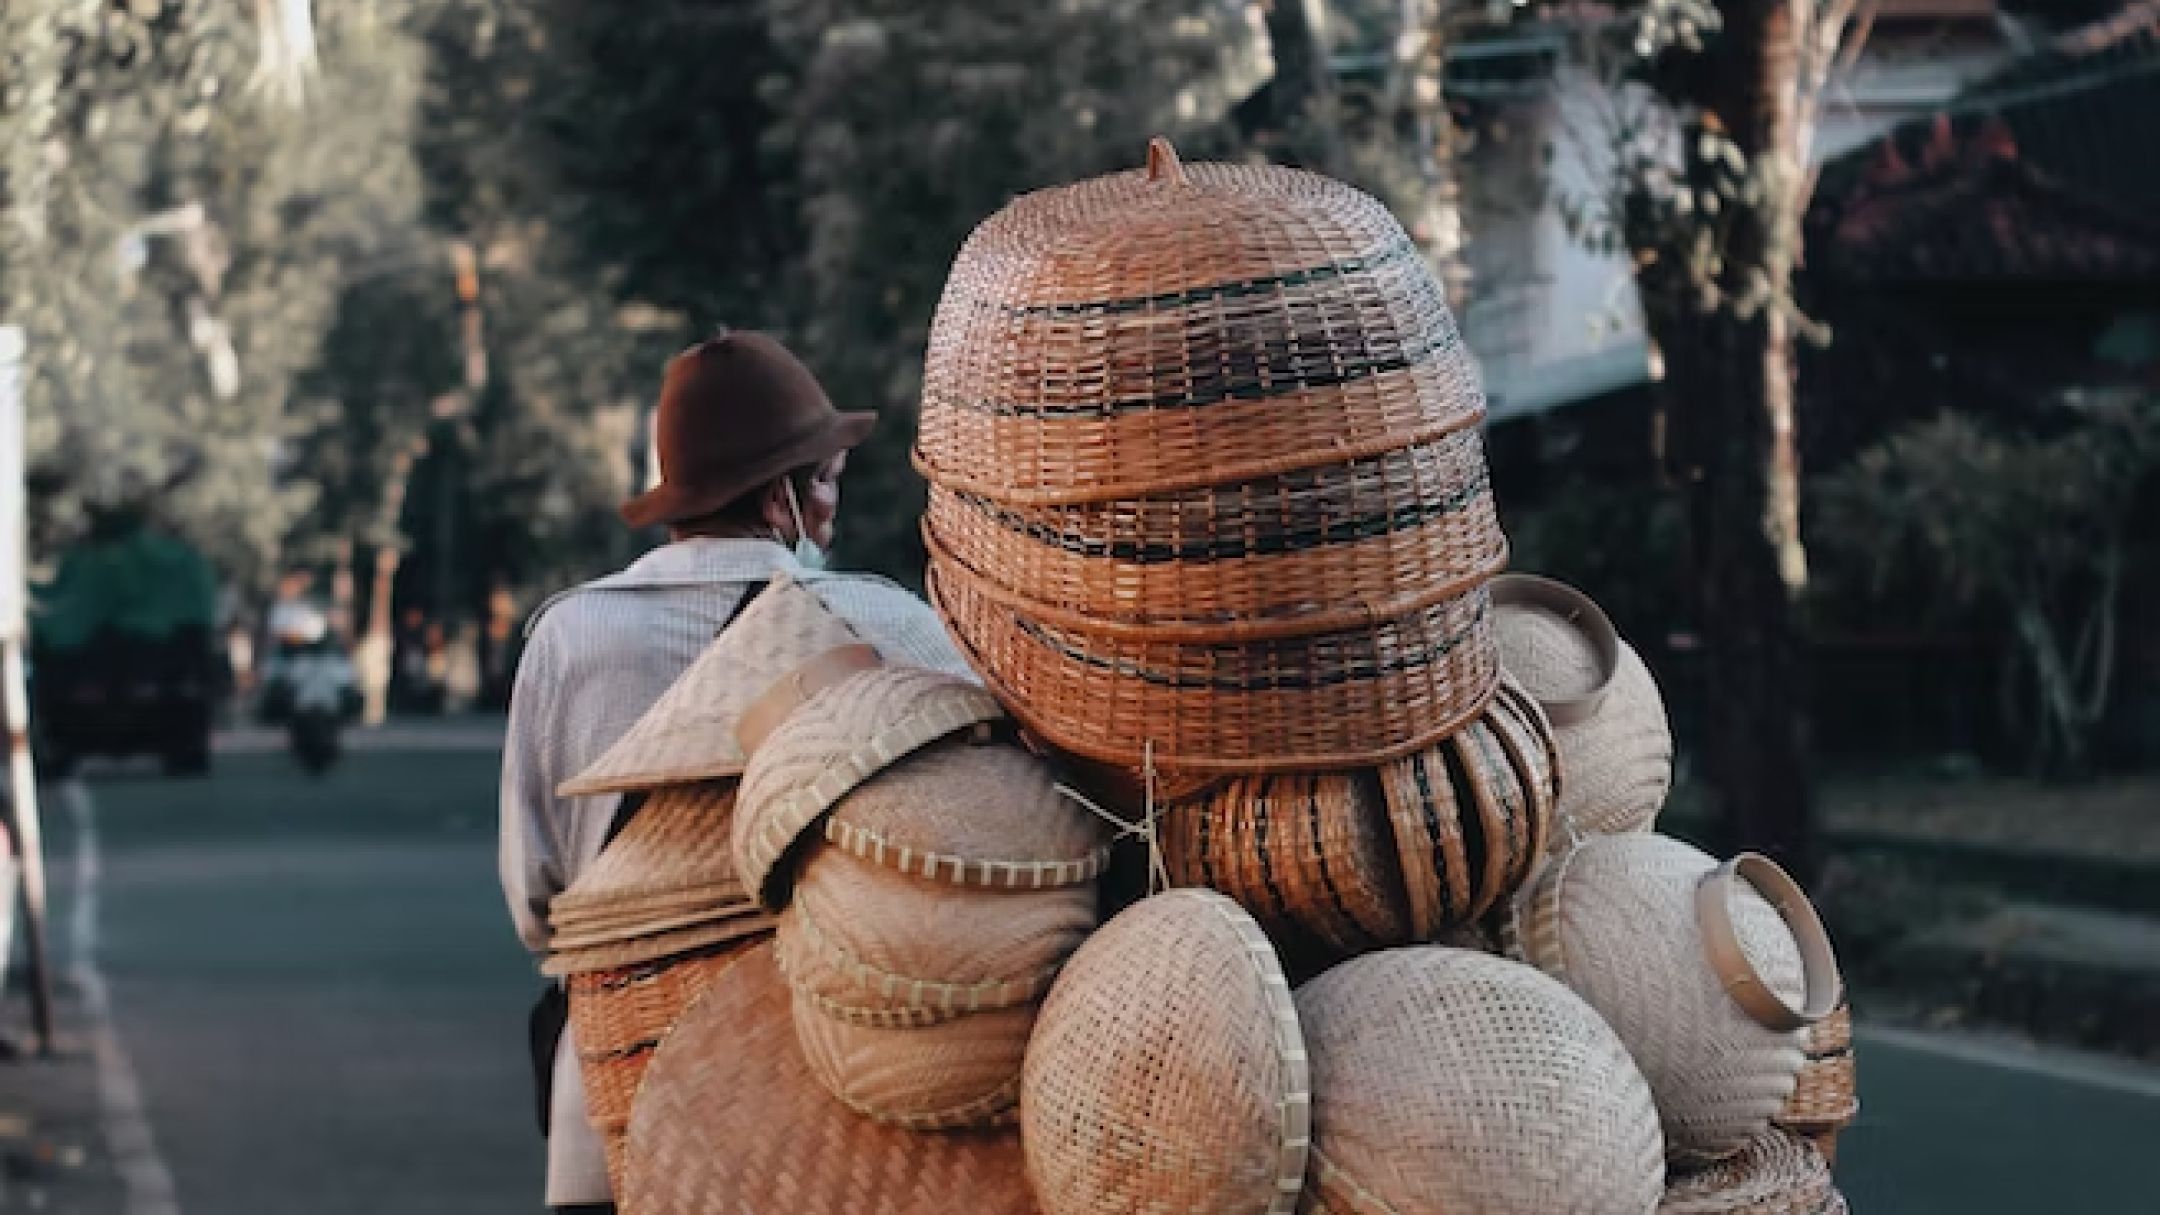 A man carries traditional Indonesian woven baskets. Qatar-Indonesia Photography Journey.